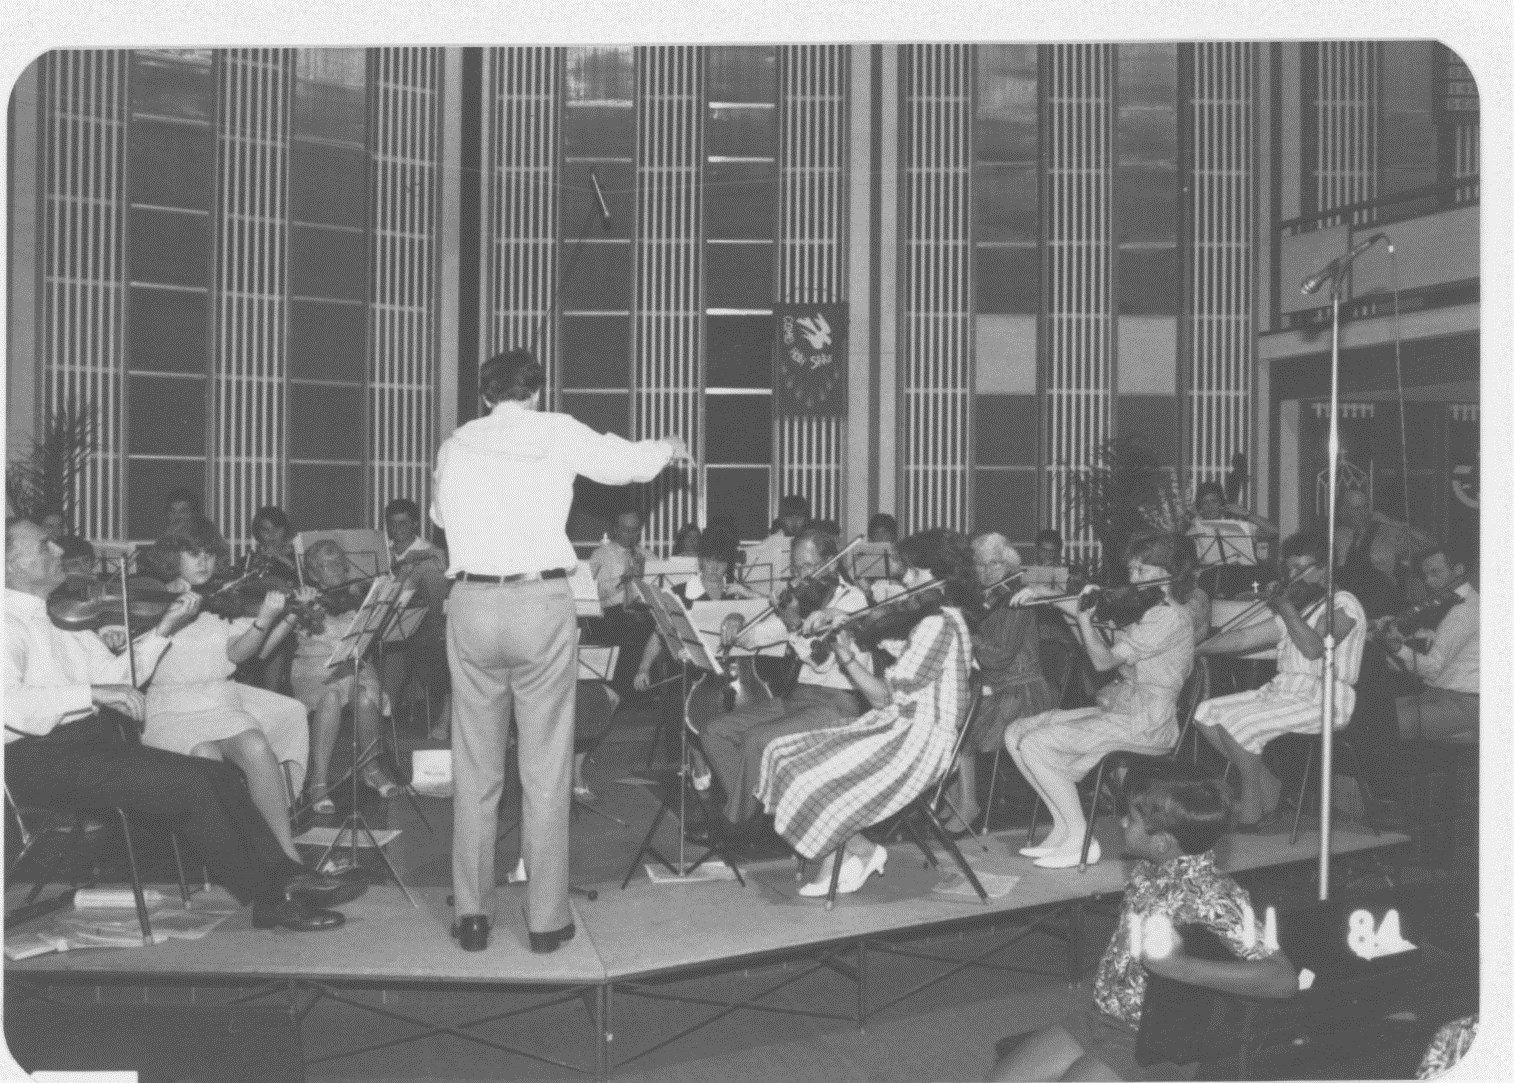 MaughanChurchServicesOrchestra1970s (1)